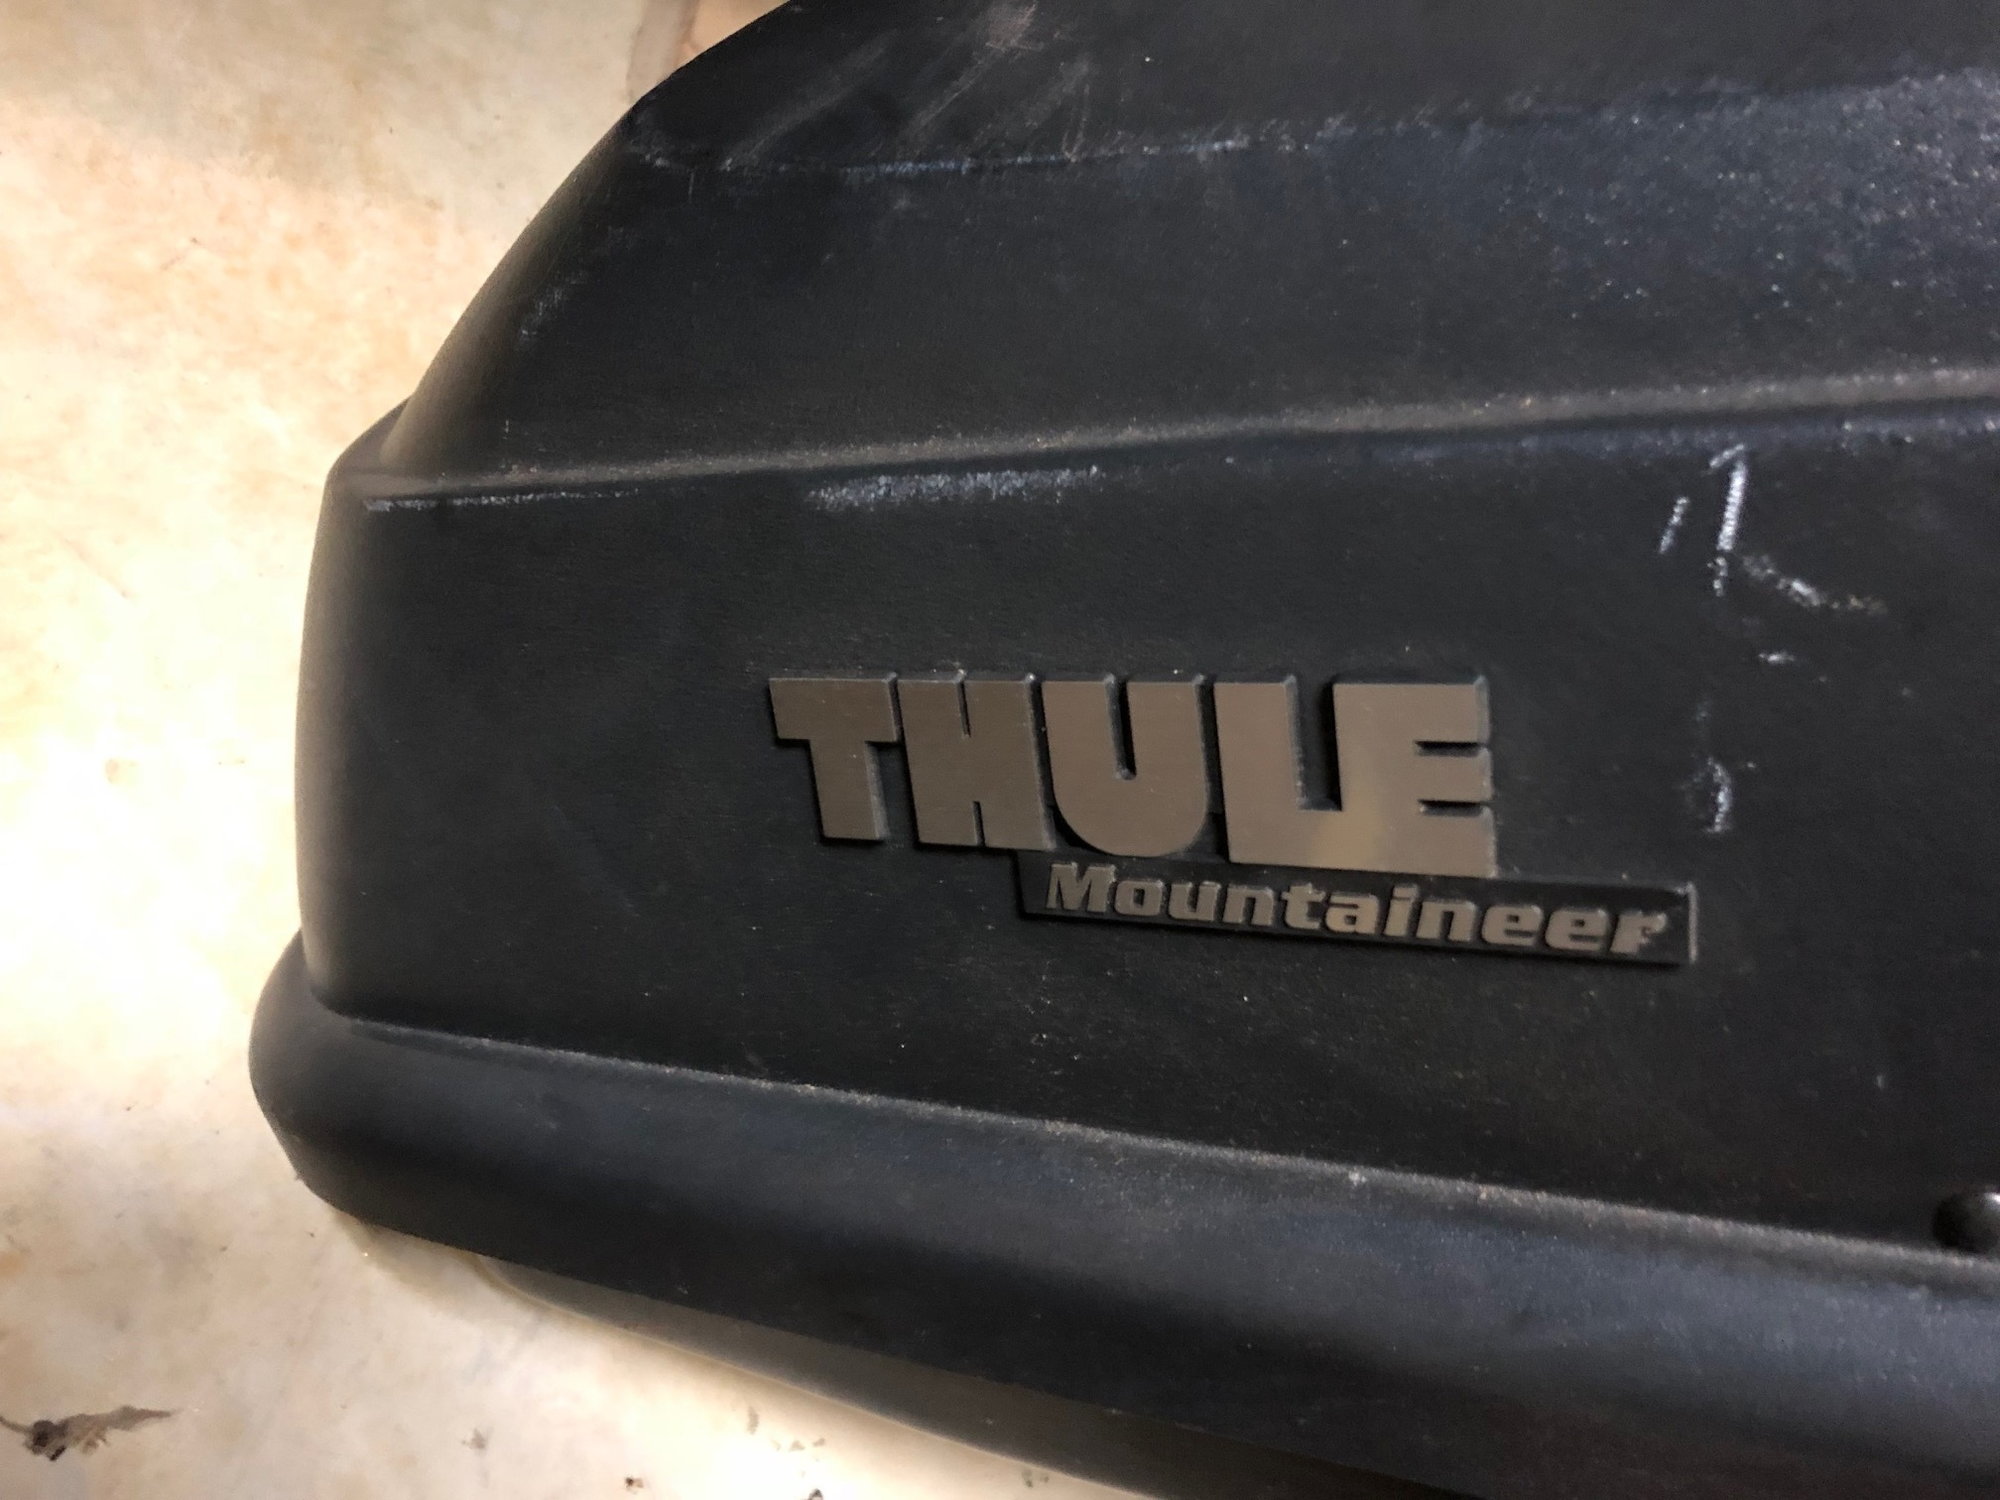 Miscellaneous - FS: Thule Mountaineer Roof Cargo Box - Used - All Years Any Make All Models - Warren, NJ 07059, United States